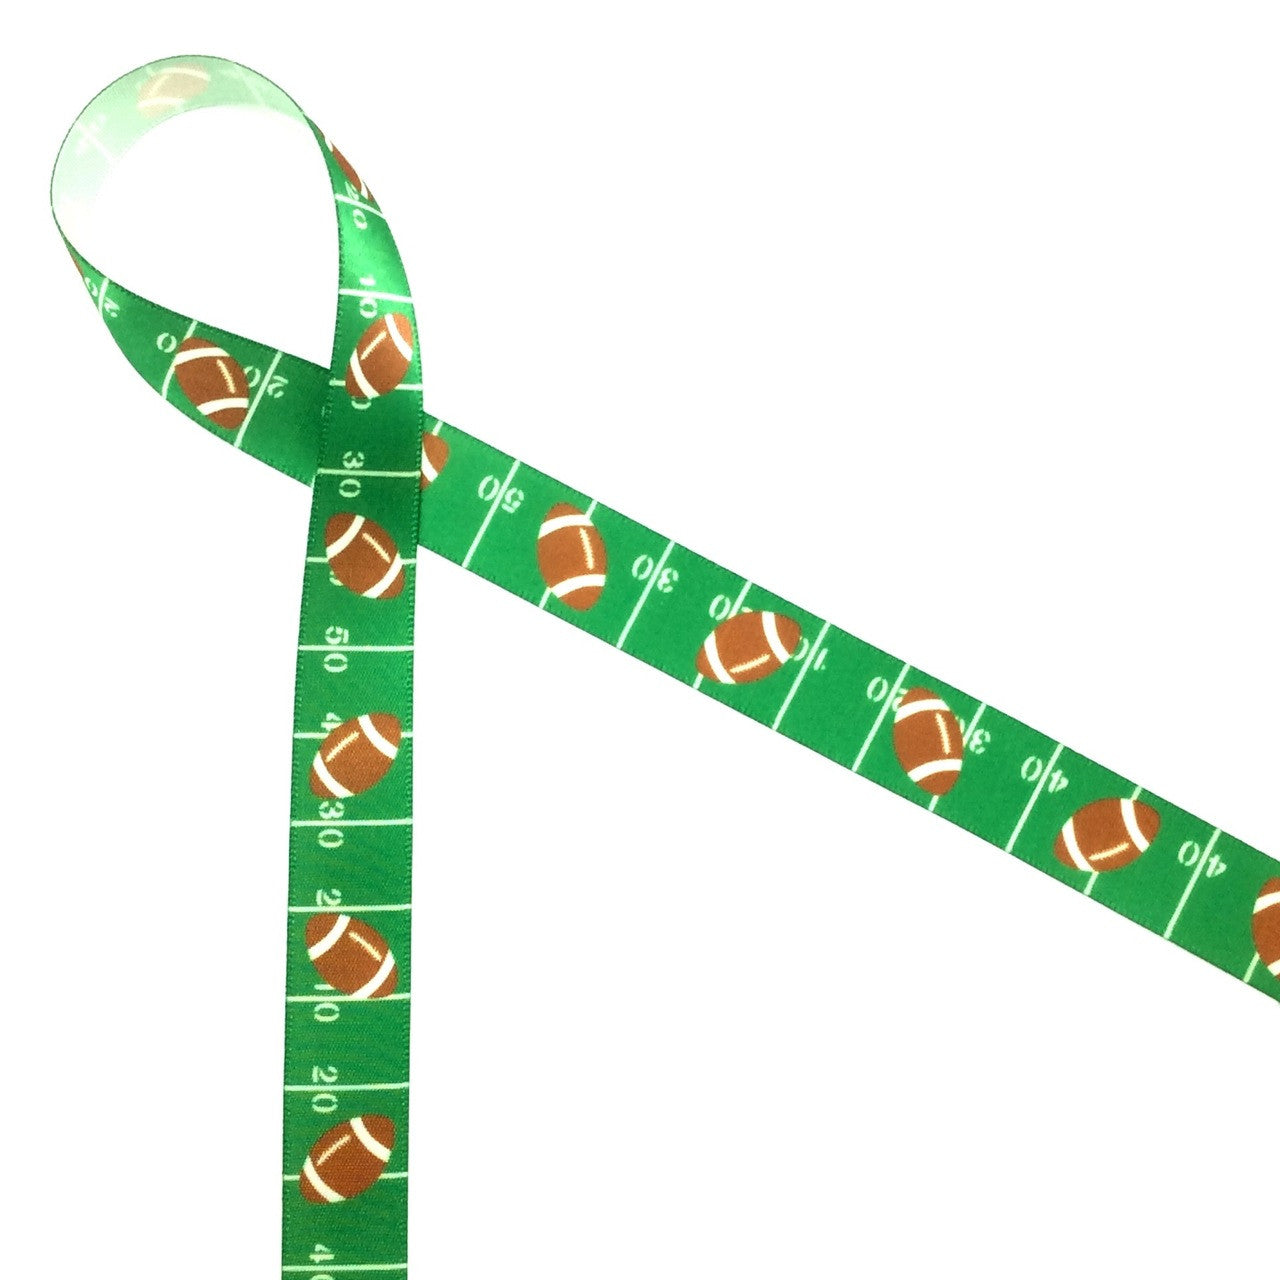 Footballs tossed along the green gridiron will make the perfect tie on your favors at your next football themed party!